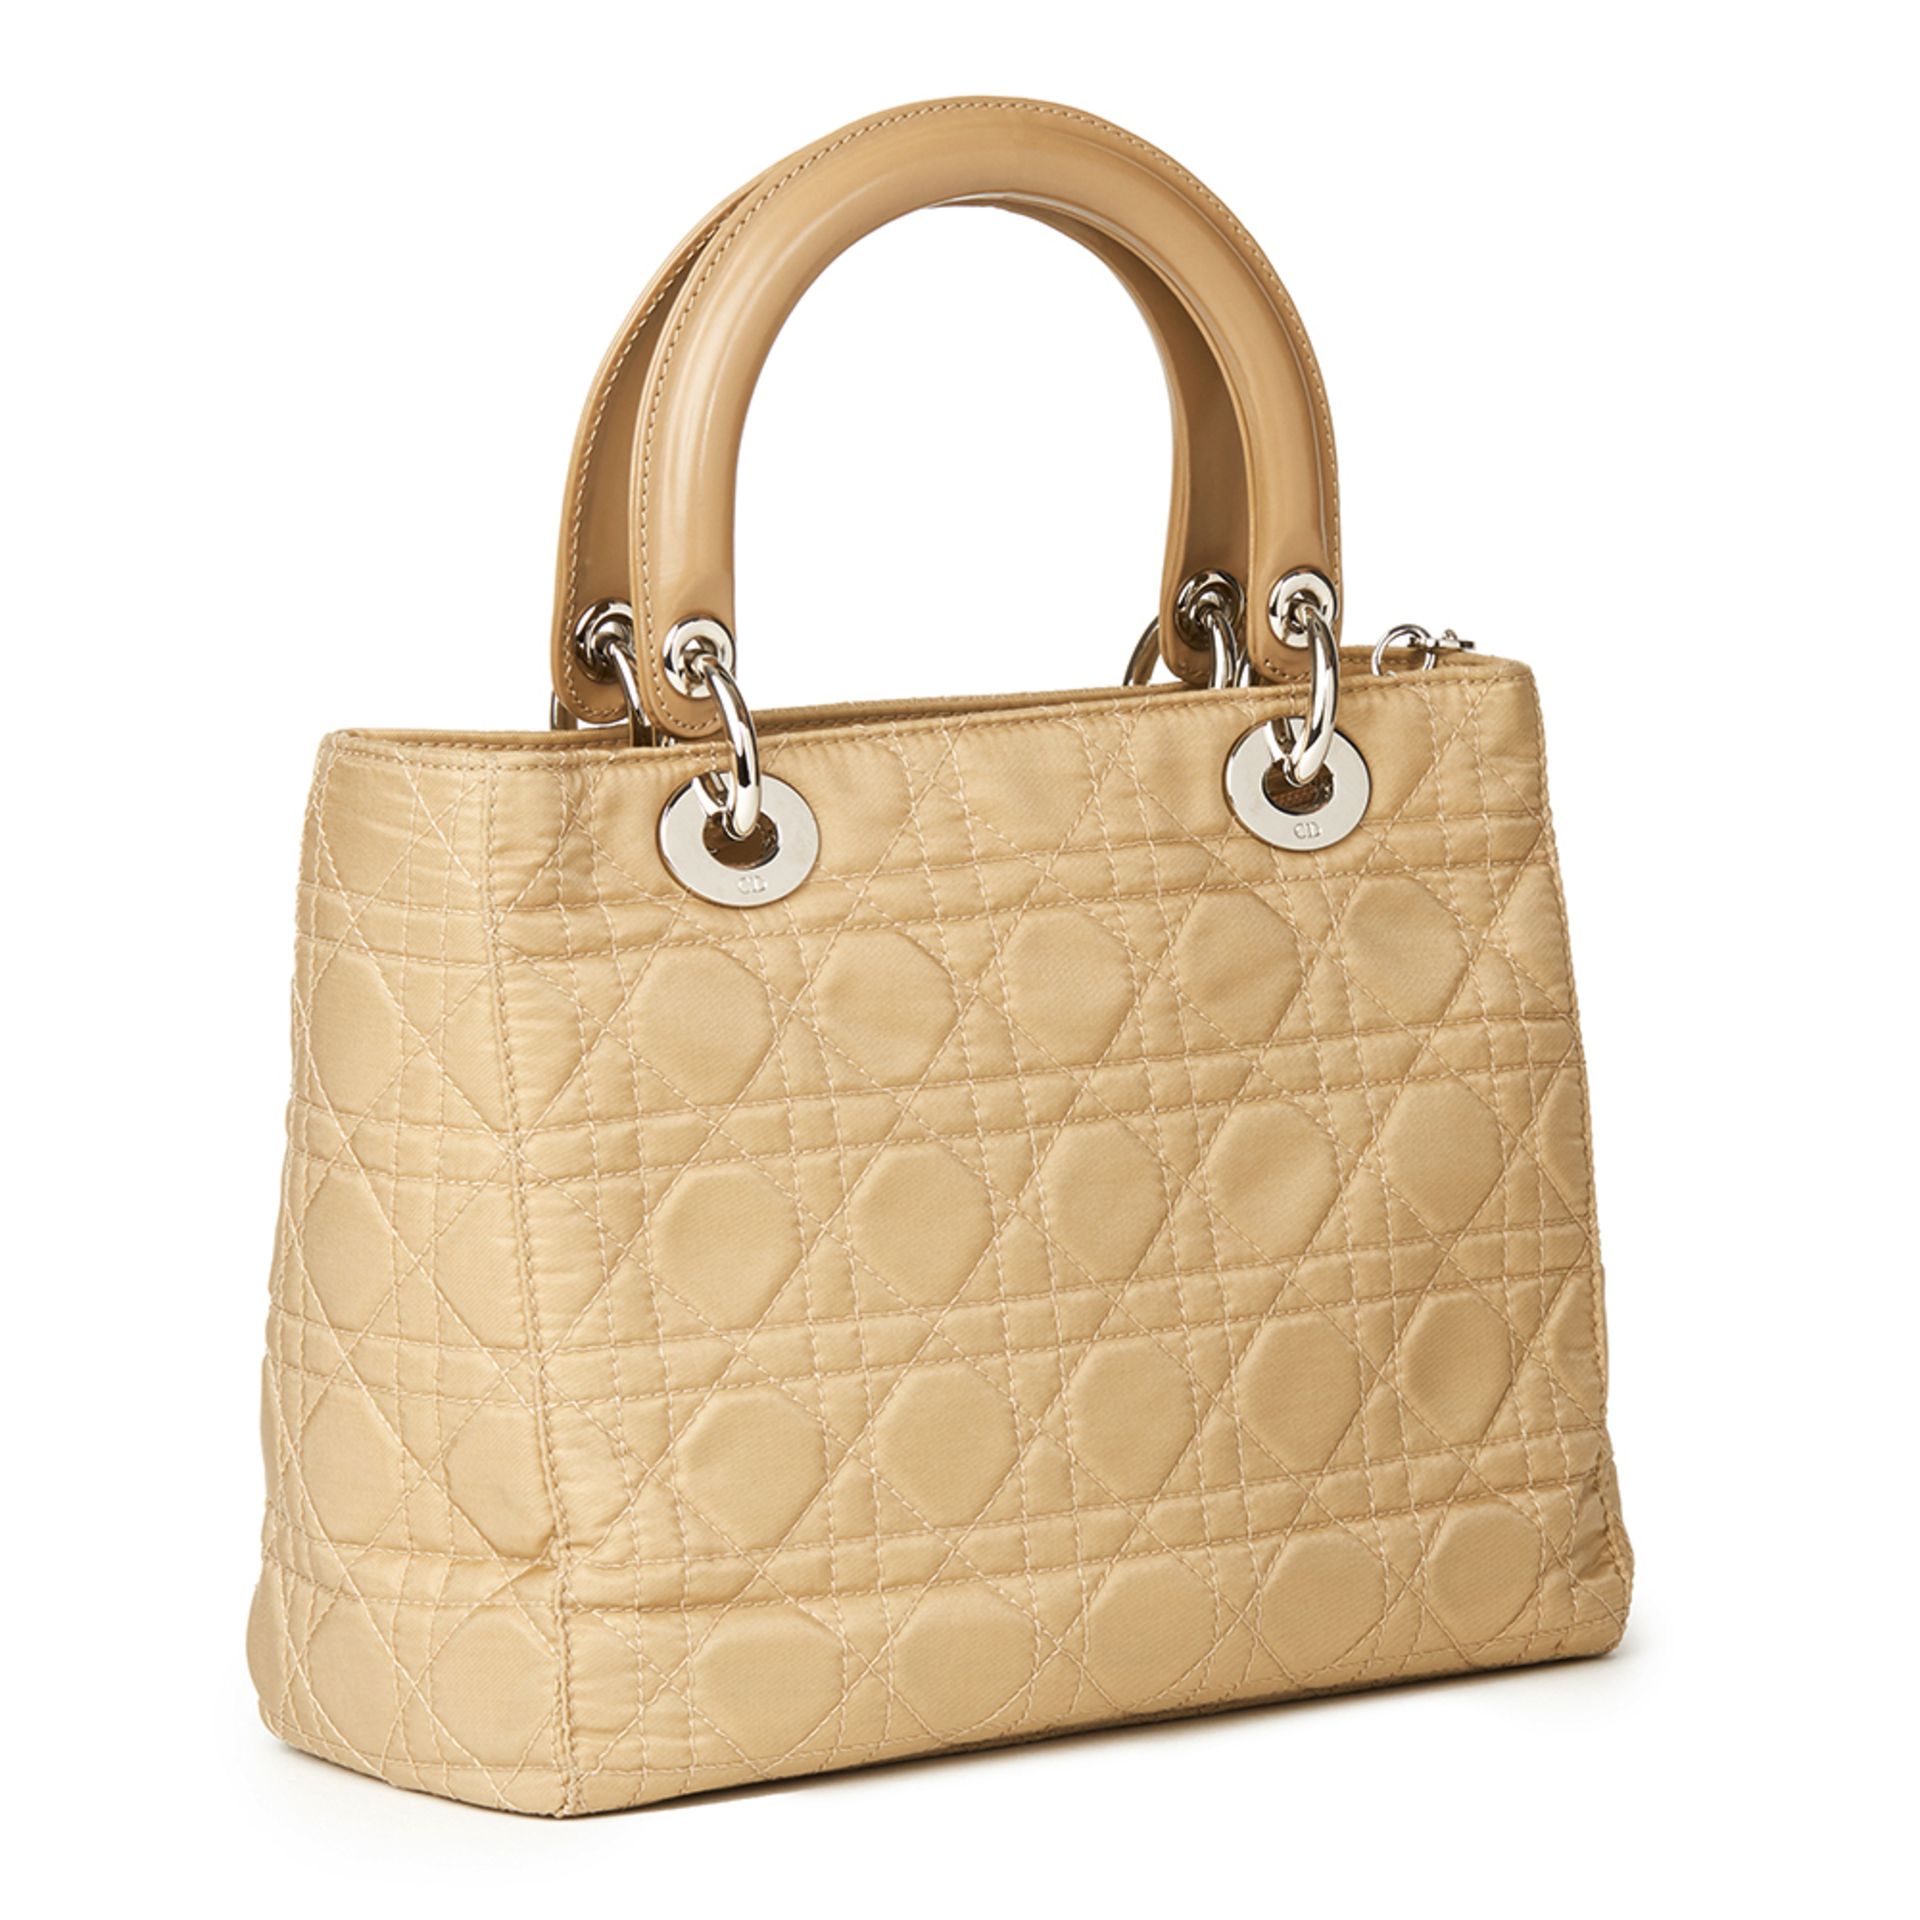 Christian Dior Beige Quilted Satin & Patent Leather Lady Dior MM - Image 4 of 10